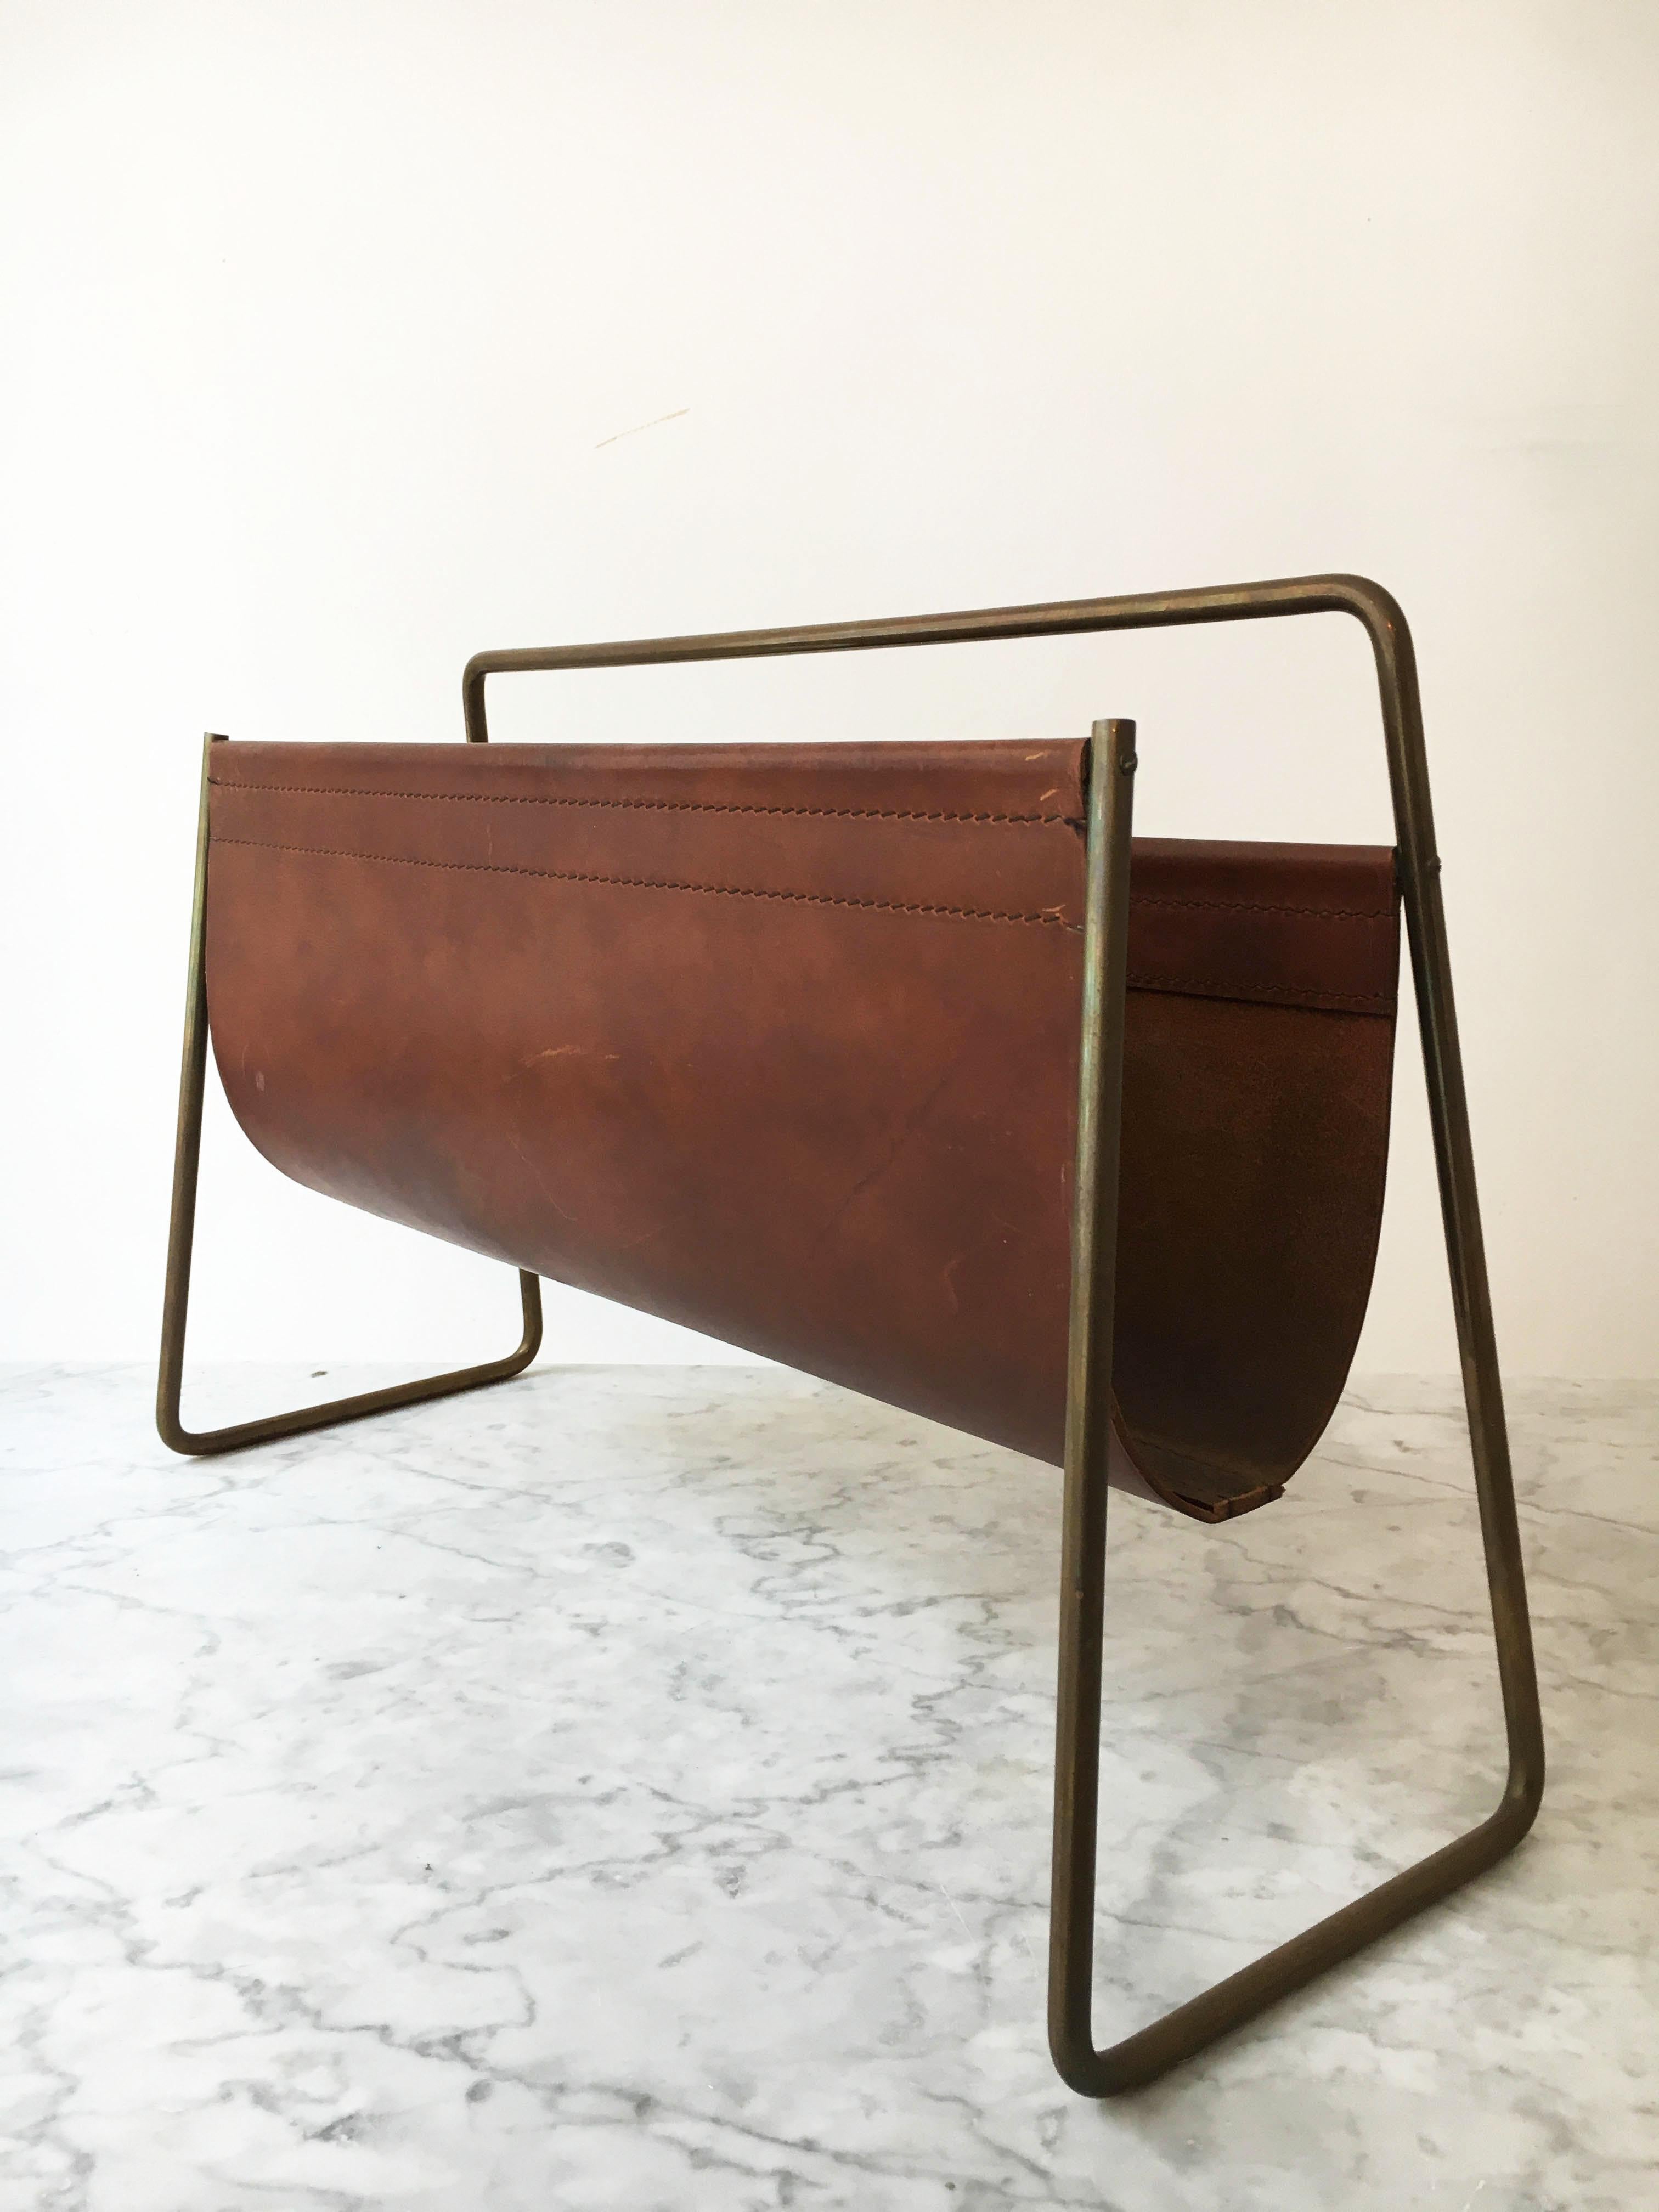 A gorgeous large magazine stand magazine Stand or rack, model no 4488 by Carl Auböck. Designed and made by Carl Auböck II, Vienna, 1950s. In excellent vintage condition with just the right amount of gently aged patina on the brass and leather.

 